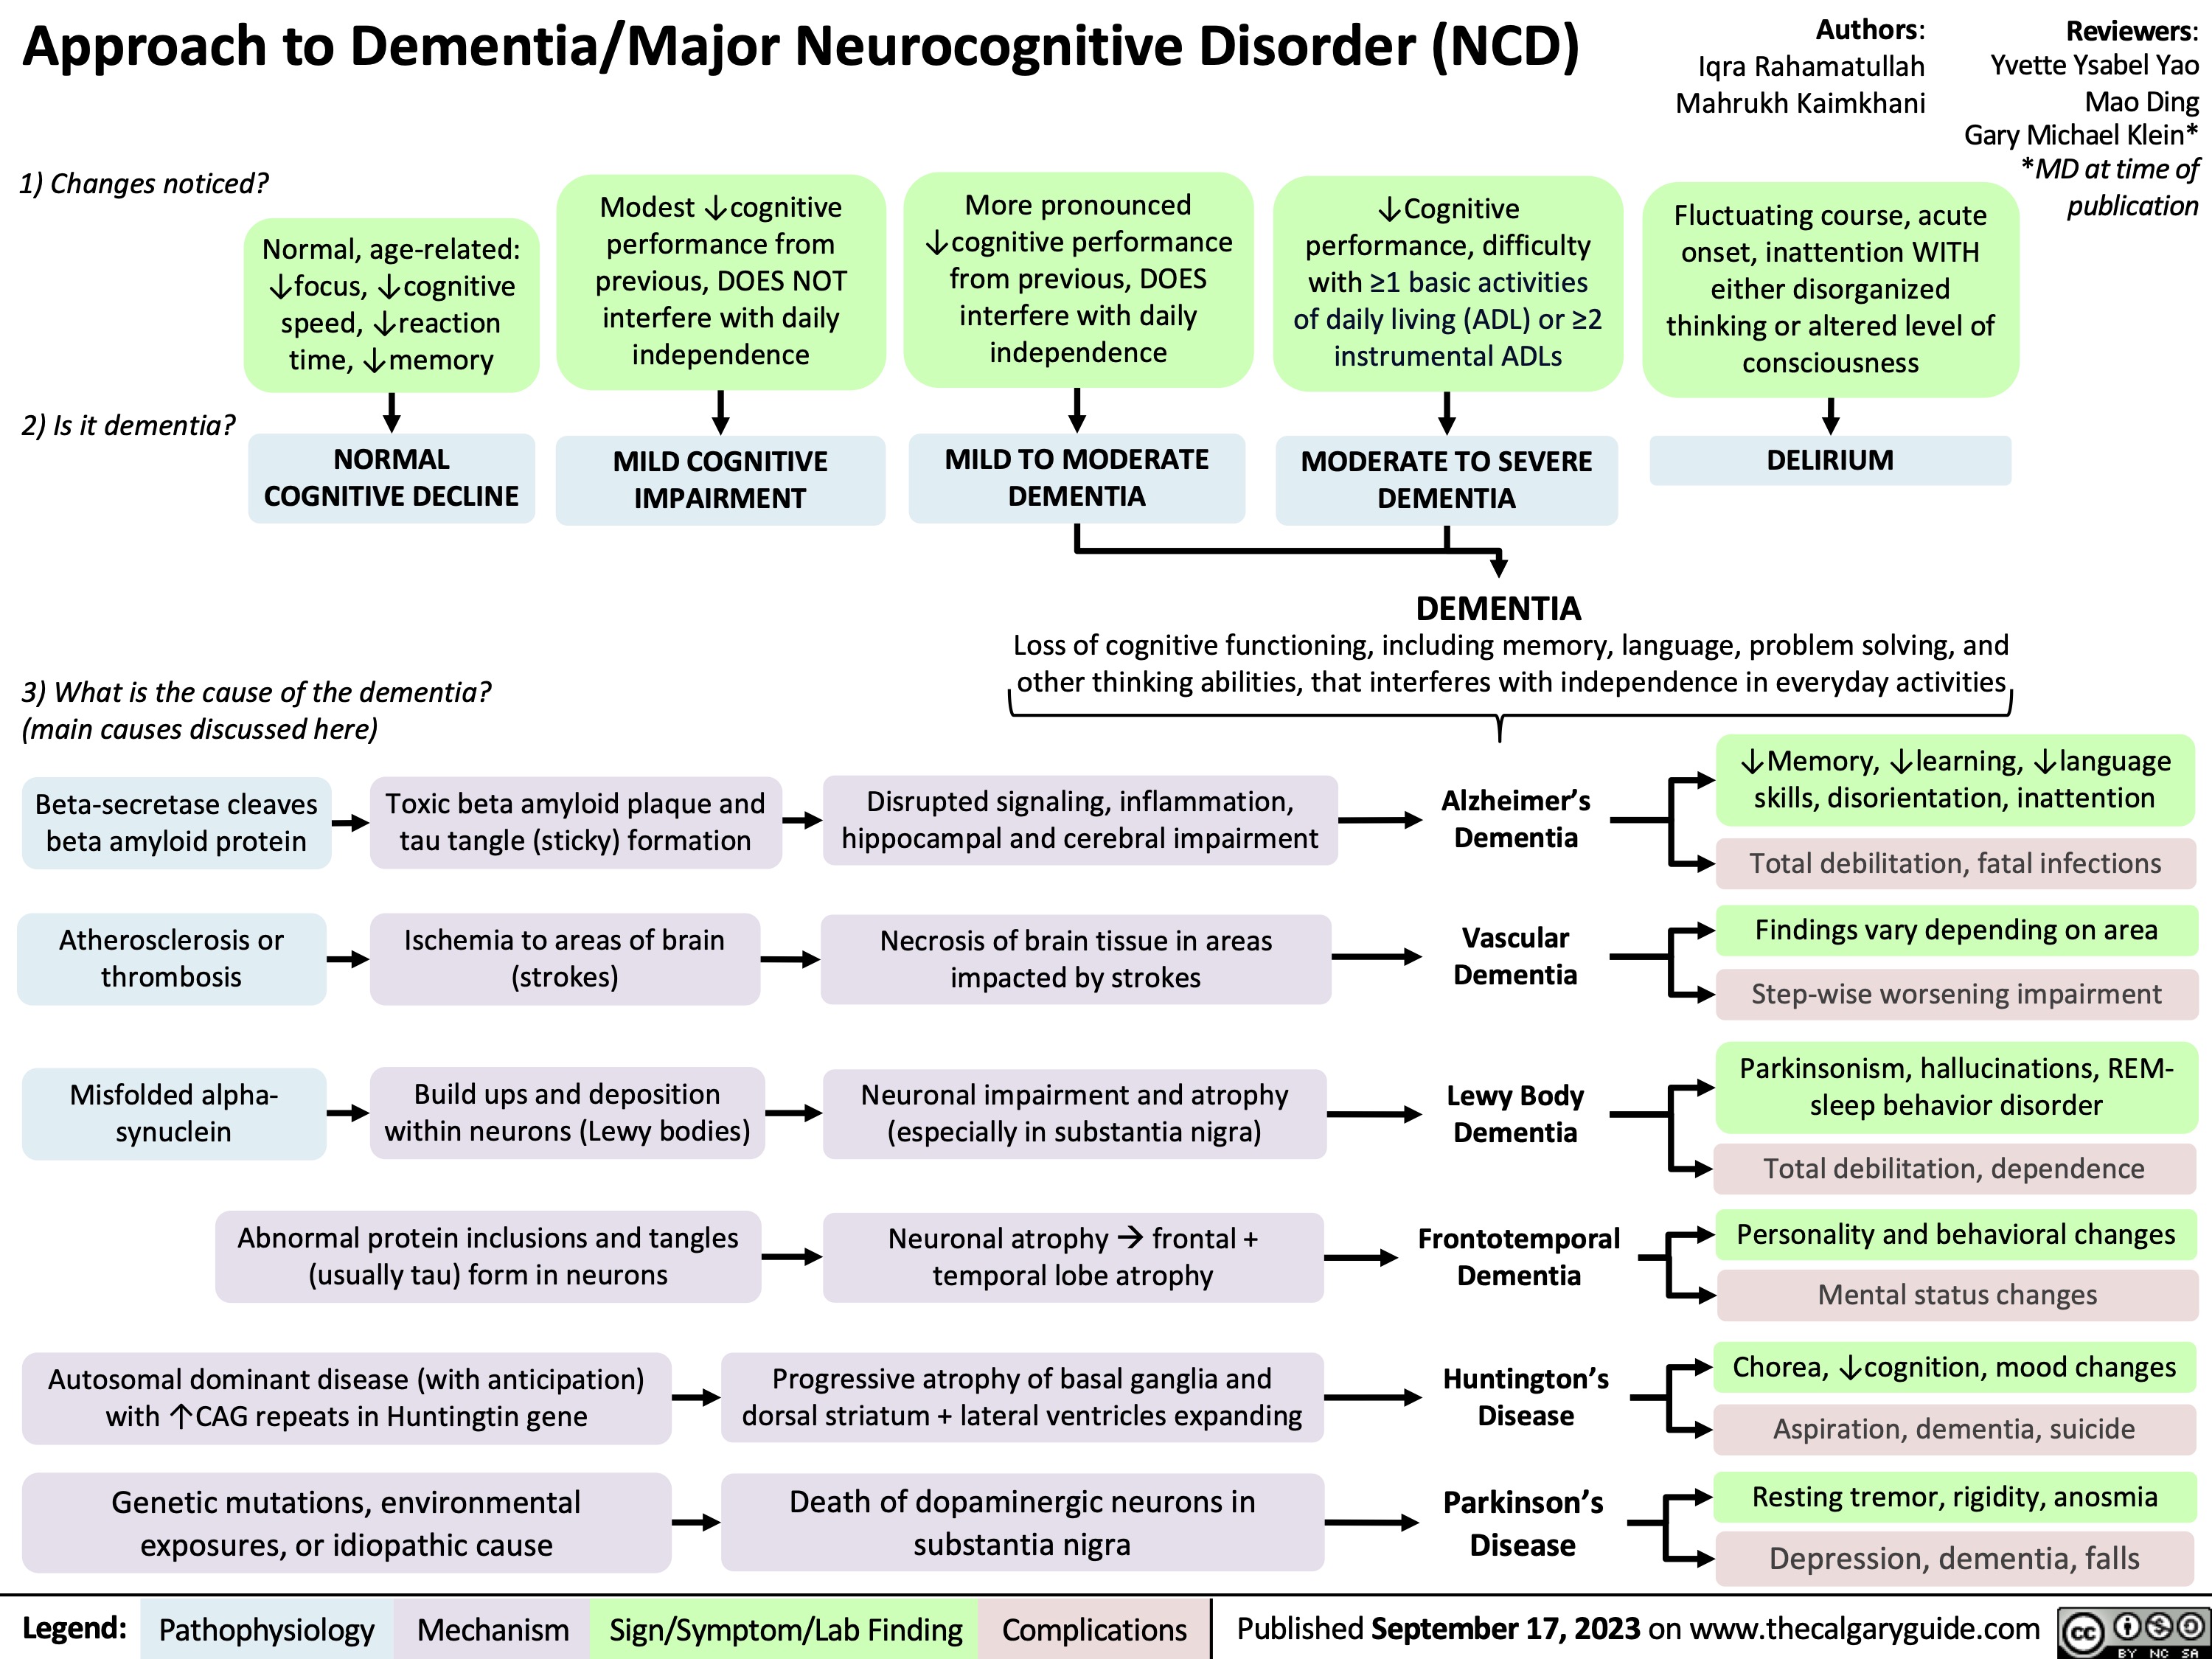 Approach to Dementia/Major Neurocognitive Disorder (NCD)
Authors: Iqra Rahamatullah Mahrukh Kaimkhani
Reviewers: Yvette Ysabel Yao Mao Ding Gary Michael Klein* *MD at time of publication
1) Changes noticed?
Modest ↓cognitive performance from previous, DOES NOT interfere with daily independence
MILD COGNITIVE IMPAIRMENT
More pronounced ↓cognitive performance from previous, DOES interfere with daily independence
MILD TO MODERATE DEMENTIA
↓Cognitive performance, difficulty with ≥1 basic activities of daily living (ADL) or ≥2 instrumental ADLs
MODERATE TO SEVERE DEMENTIA
DEMENTIA
Fluctuating course, acute onset, inattention WITH either disorganized thinking or altered level of consciousness
DELIRIUM
     2) Is it dementia?
Normal, age-related: ↓focus, ↓cognitive speed, ↓reaction time, ↓memory
NORMAL COGNITIVE DECLINE
      3) What is the cause of the dementia? (main causes discussed here)
Loss of cognitive functioning, including memory, language, problem solving, and other thinking abilities, that interferes with independence in everyday activities
      Beta-secretase cleaves beta amyloid protein
Atherosclerosis or thrombosis
Misfolded alpha- synuclein
Toxic beta amyloid plaque and tau tangle (sticky) formation
Ischemia to areas of brain (strokes)
Build ups and deposition within neurons (Lewy bodies)
Disrupted signaling, inflammation, hippocampal and cerebral impairment
Necrosis of brain tissue in areas impacted by strokes
Neuronal impairment and atrophy (especially in substantia nigra)
Neuronal atrophyàfrontal + temporal lobe atrophy
Progressive atrophy of basal ganglia and dorsal striatum + lateral ventricles expanding
Death of dopaminergic neurons in substantia nigra
Alzheimer’s Dementia
Vascular Dementia
Lewy Body Dementia
Frontotemporal Dementia
Huntington’s Disease
Parkinson’s Disease
↓Memory, ↓learning, ↓language skills, disorientation, inattention
Total debilitation, fatal infections
Findings vary depending on area
Step-wise worsening impairment
Parkinsonism, hallucinations, REM- sleep behavior disorder
Total debilitation, dependence
Personality and behavioral changes
Mental status changes
Chorea, ↓cognition, mood changes
Aspiration, dementia, suicide
Resting tremor, rigidity, anosmia
Depression, dementia, falls
              Abnormal protein inclusions and tangles (usually tau) form in neurons
Autosomal dominant disease (with anticipation) with ↑CAG repeats in Huntingtin gene
Genetic mutations, environmental exposures, or idiopathic cause
          Legend:
 Pathophysiology
Mechanism
Sign/Symptom/Lab Finding
 Complications
 Published September 17, 2023 on www.thecalgaryguide.com
   
Approach to Dementia/Major Neurocognitive Disorder (NCD)
Authors: Iqra Rahamatullah Mahrukh Kaimkhani Reviewers: Yvette Ysabel Yao
Fluctuating course, acute onset, inattention WITH either disorganized thinking or altered level of consciousness (LOC)?
DELIRIUM
    1) Changes noticed?
2) Is it dementia?
Normal, age-related: ↓focus, ↓cognitive speed, ↓reaction time, ↓memory
NORMAL COGNITIVE DECLINE
Modest ↓cognitive performance from previous, DOES NOT interfere with daily independence
MILD COGNITIVE IMPAIRMENT
More pronounced ↓cognitive performance from previous, DOES interfere with daily independence
MILD TO MODERATE DEMENTIA
↓Cognitive performance, difficulty with ≥1 basic activities of daily living (ADL) or ≥2 instrumental ADLs
MODERATE TO SEVERE DEMENTIA
        3) What is the cause of the dementia? (main causes discussed here)
Beta-secretase cleaves beta amyloid protein
Atherosclerosis or thrombosis
Misfolded alpha-synuclein
Toxic beta amyloid plaque and tau tangle (sticky) formation
Ischemia to areas of brain (strokes)
Build ups and deposition within neurons (Lewy bodies)
Disrupted signaling, inflammation, hippocampal and cerebral impairment
Necrosis of brain tissue in areas impacted by strokes
Neuronal impairment and atrophy (especially in substantia nigra)
Neuronal atrophyàfrontal + temporal lobe atrophy
Progressive atrophy of basal ganglia and dorsal striatum + lateral ventricles expanding
Death of dopaminergic neurons in substantia nigra
Alzheimer’s Dementia
Vascular Dementia
Lewy Body Dementia
Frontotemporal Dementia
Huntington’s Disease
Parkinson’s Disease
↓Memory, ↓learning, ↓language skills, disorientation, inattention
Total debilitation, fatal infections
Findings vary depending on area
Step-wise worsening impairment
Parkinsonism, hallucinations, REM- sleep behavior disorder
Total debilitation, dependence
Personality and behavioral changes
Mental status changes
Chorea, ↓cognition, mood changes
Aspiration, dementia, suicide
Resting tremor, rigidity, anosmia
Depression, dementia, falls
DEMENTIA
Loss of cognitive functioning, including memory, language, problem solving, and other thinking abilities, that interferes with independence in everyday activities
                    Abnormal protein inclusions and tangles (usually tau) form in neurons
Autosomal dominant disease (with anticipation) with ↑CAG repeats in Huntingtin gene
Genetic mutations, environmental exposures, or idiopathic cause
          Legend:
 Pathophysiology
Mechanism
Sign/Symptom/Lab Finding
 Complications
 Published September 17, 2023 on www.thecalgaryguide.com
   